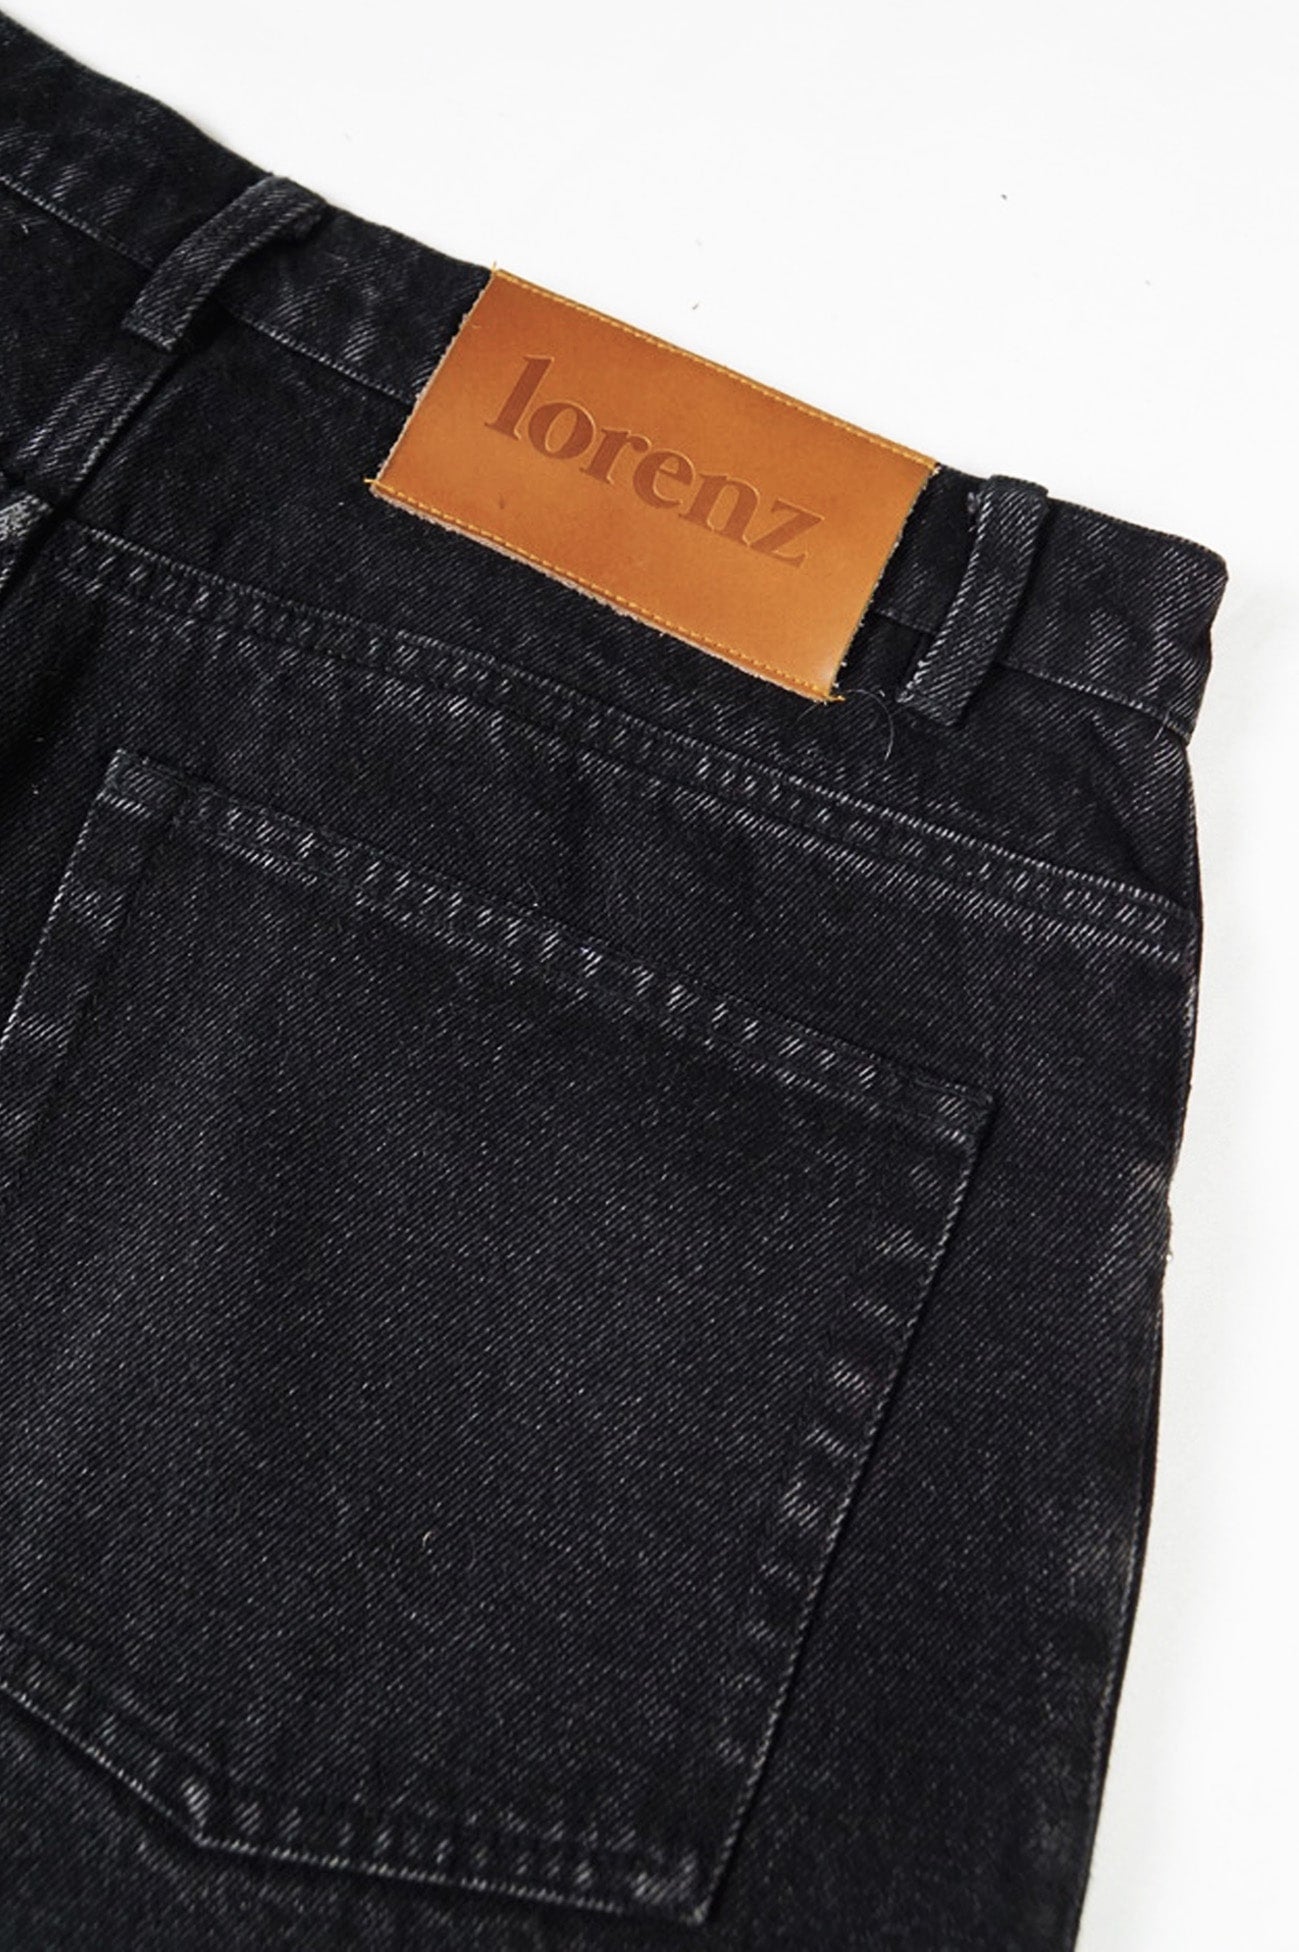 Galaxy Loose Fitted Jeans - Acid Wash Black